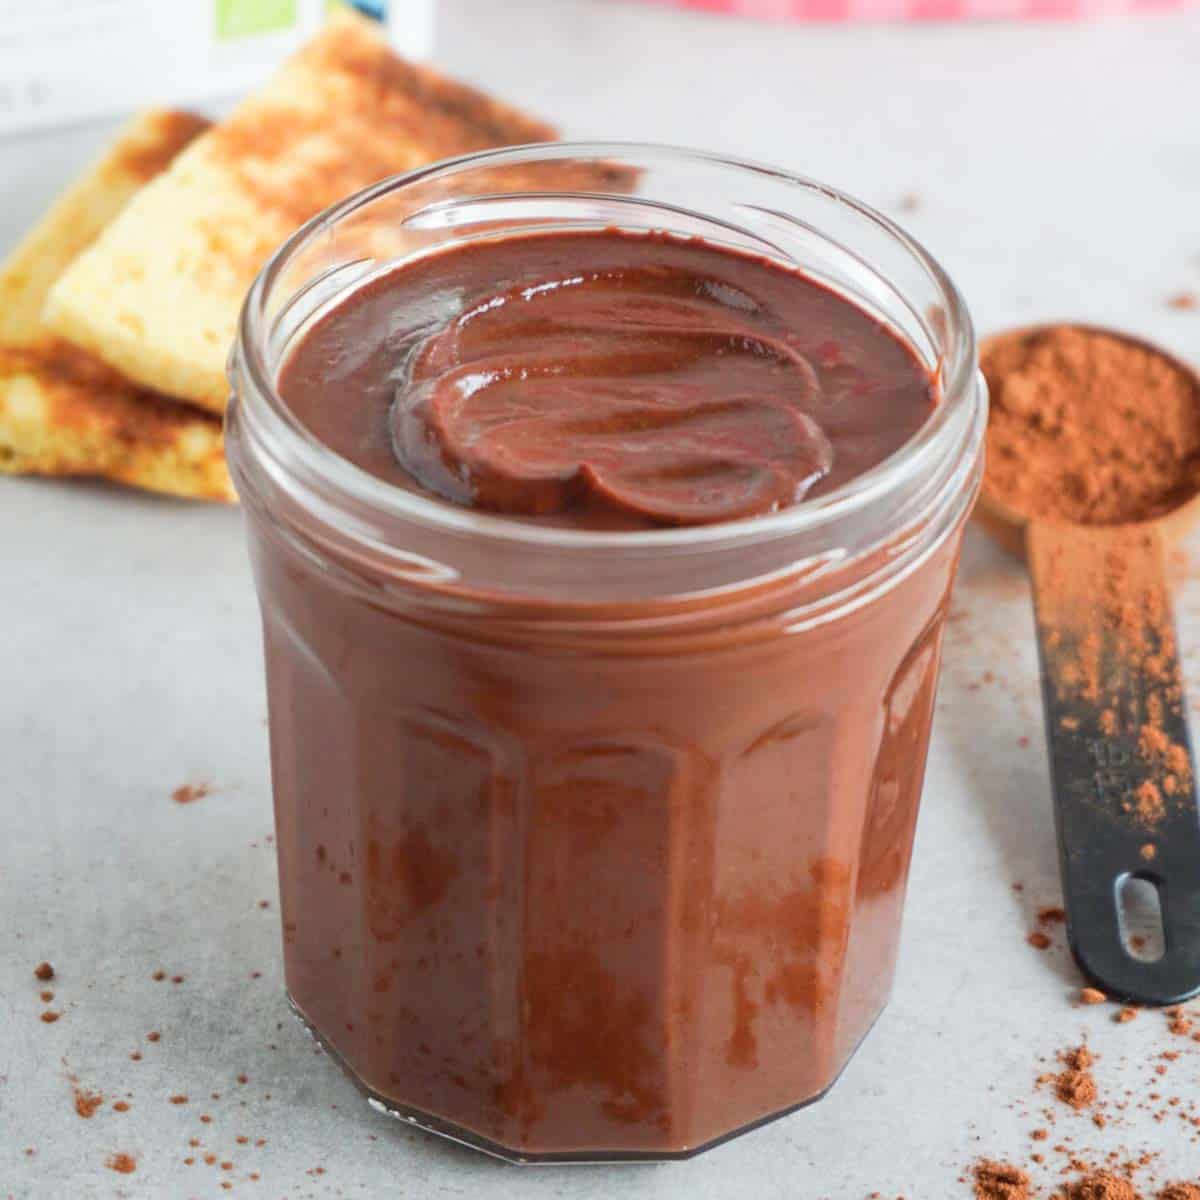 Close up picture of chocolate spread in an opened glass jar on a grey cooking surface with cocoa powder sprinkled on it.